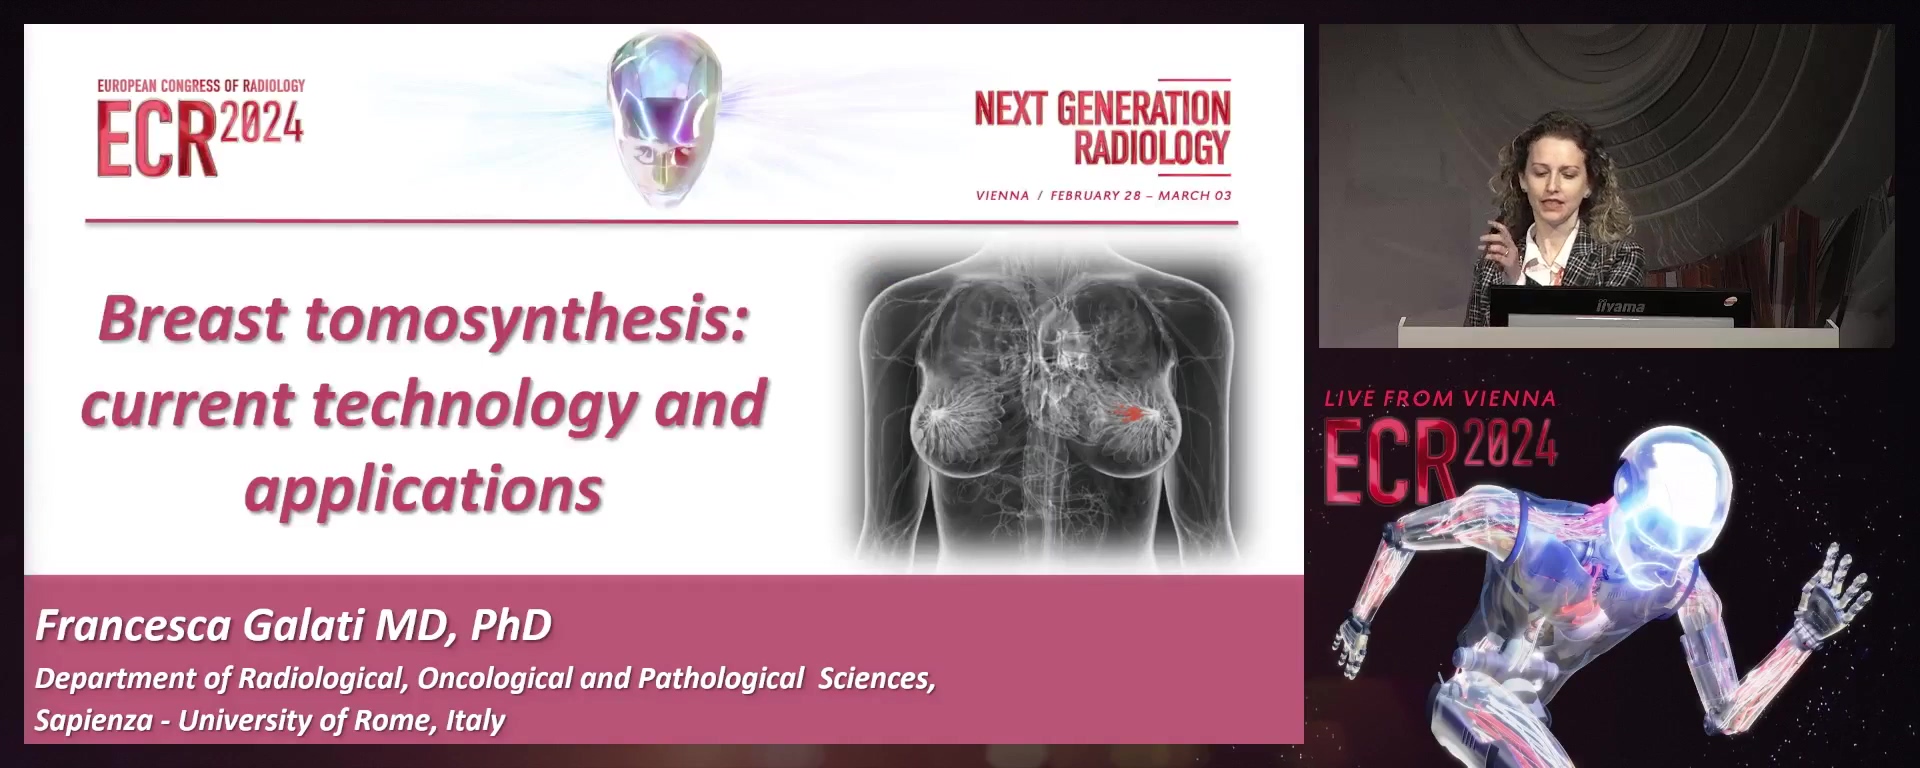 Breast tomosynthesis: current technology and applications